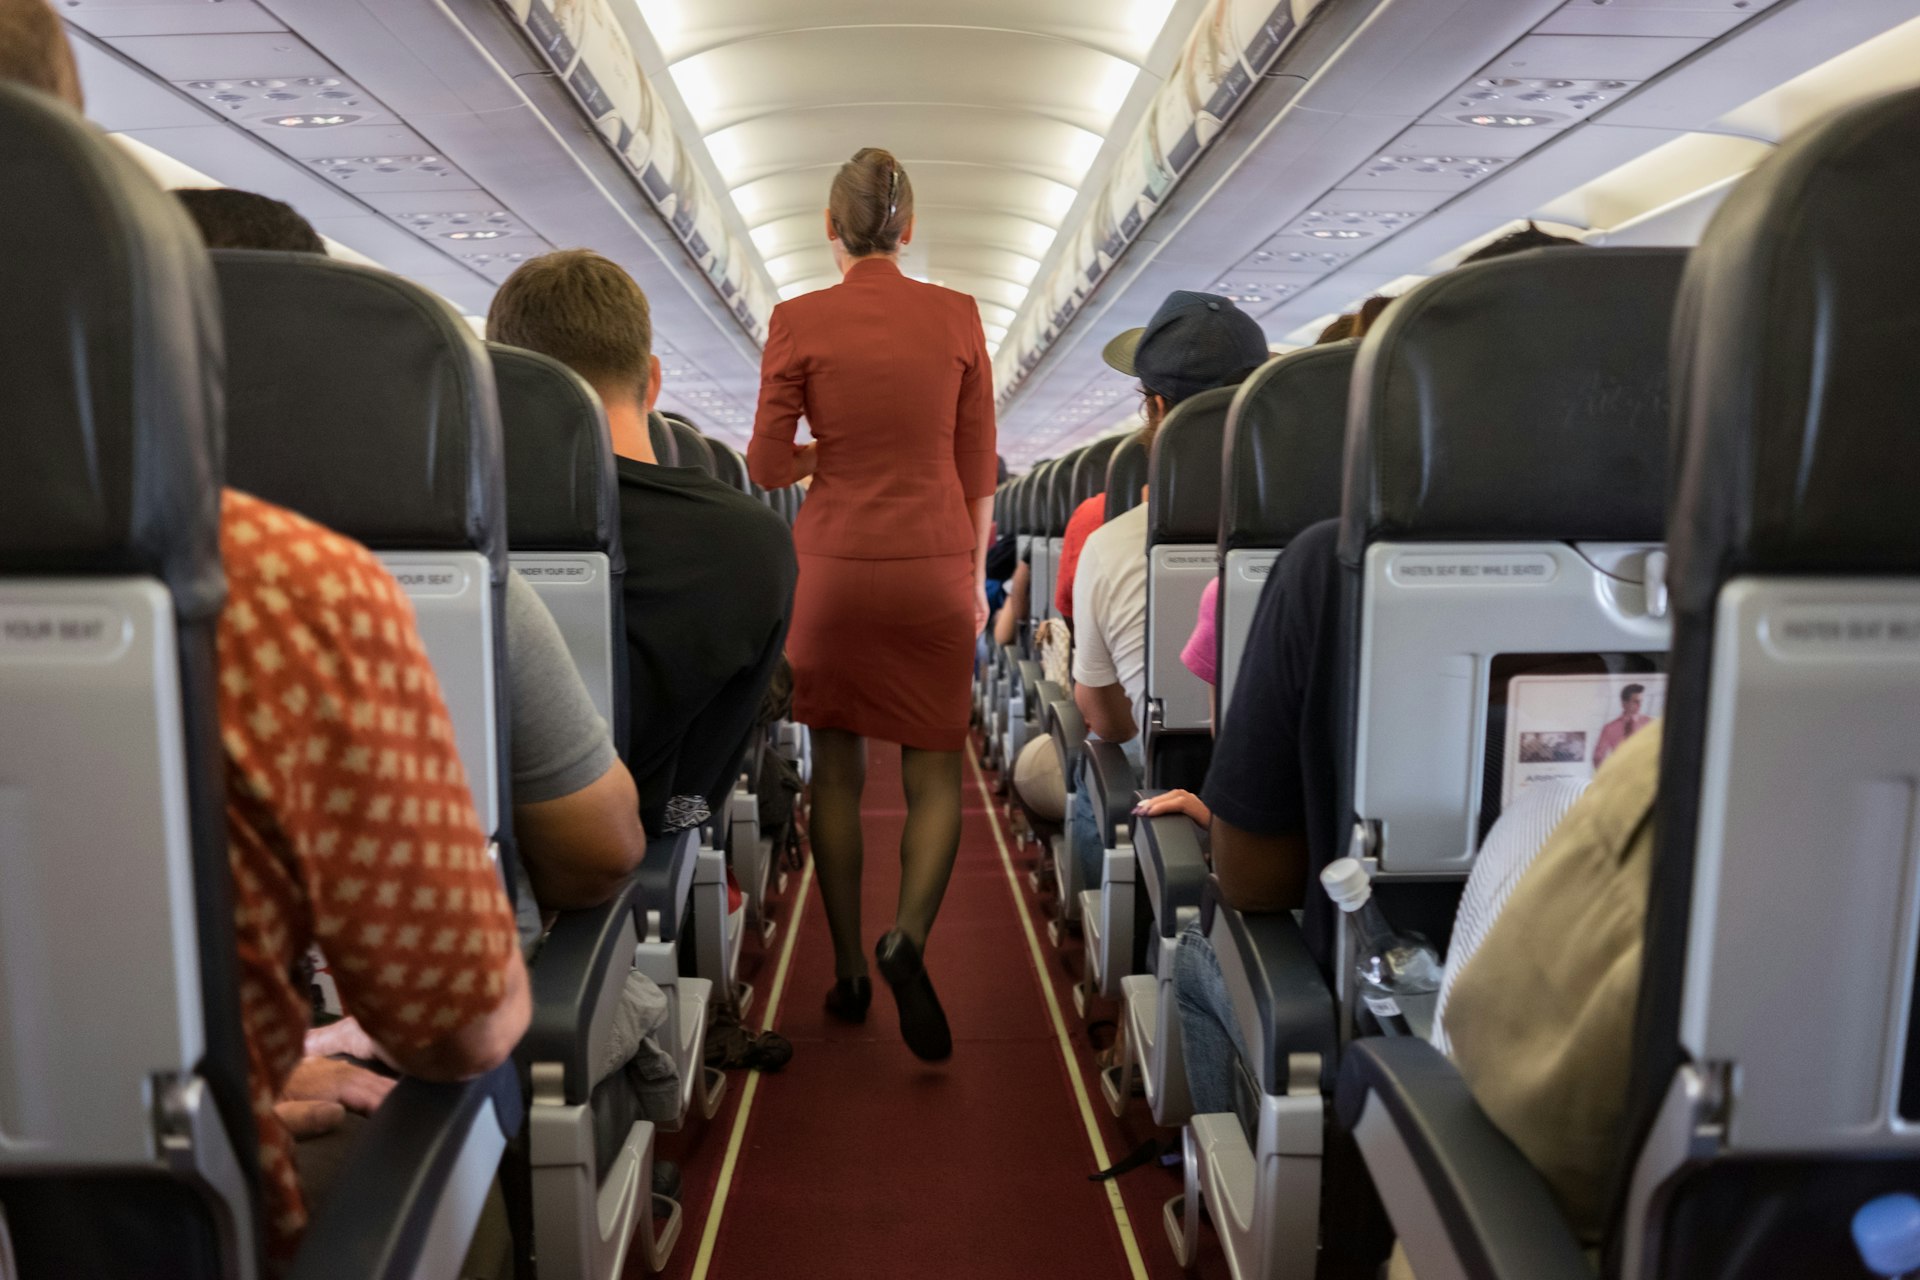 A member of cabin crew wearing a red uniform walks down the central aisle of a plane while all passengers are seated